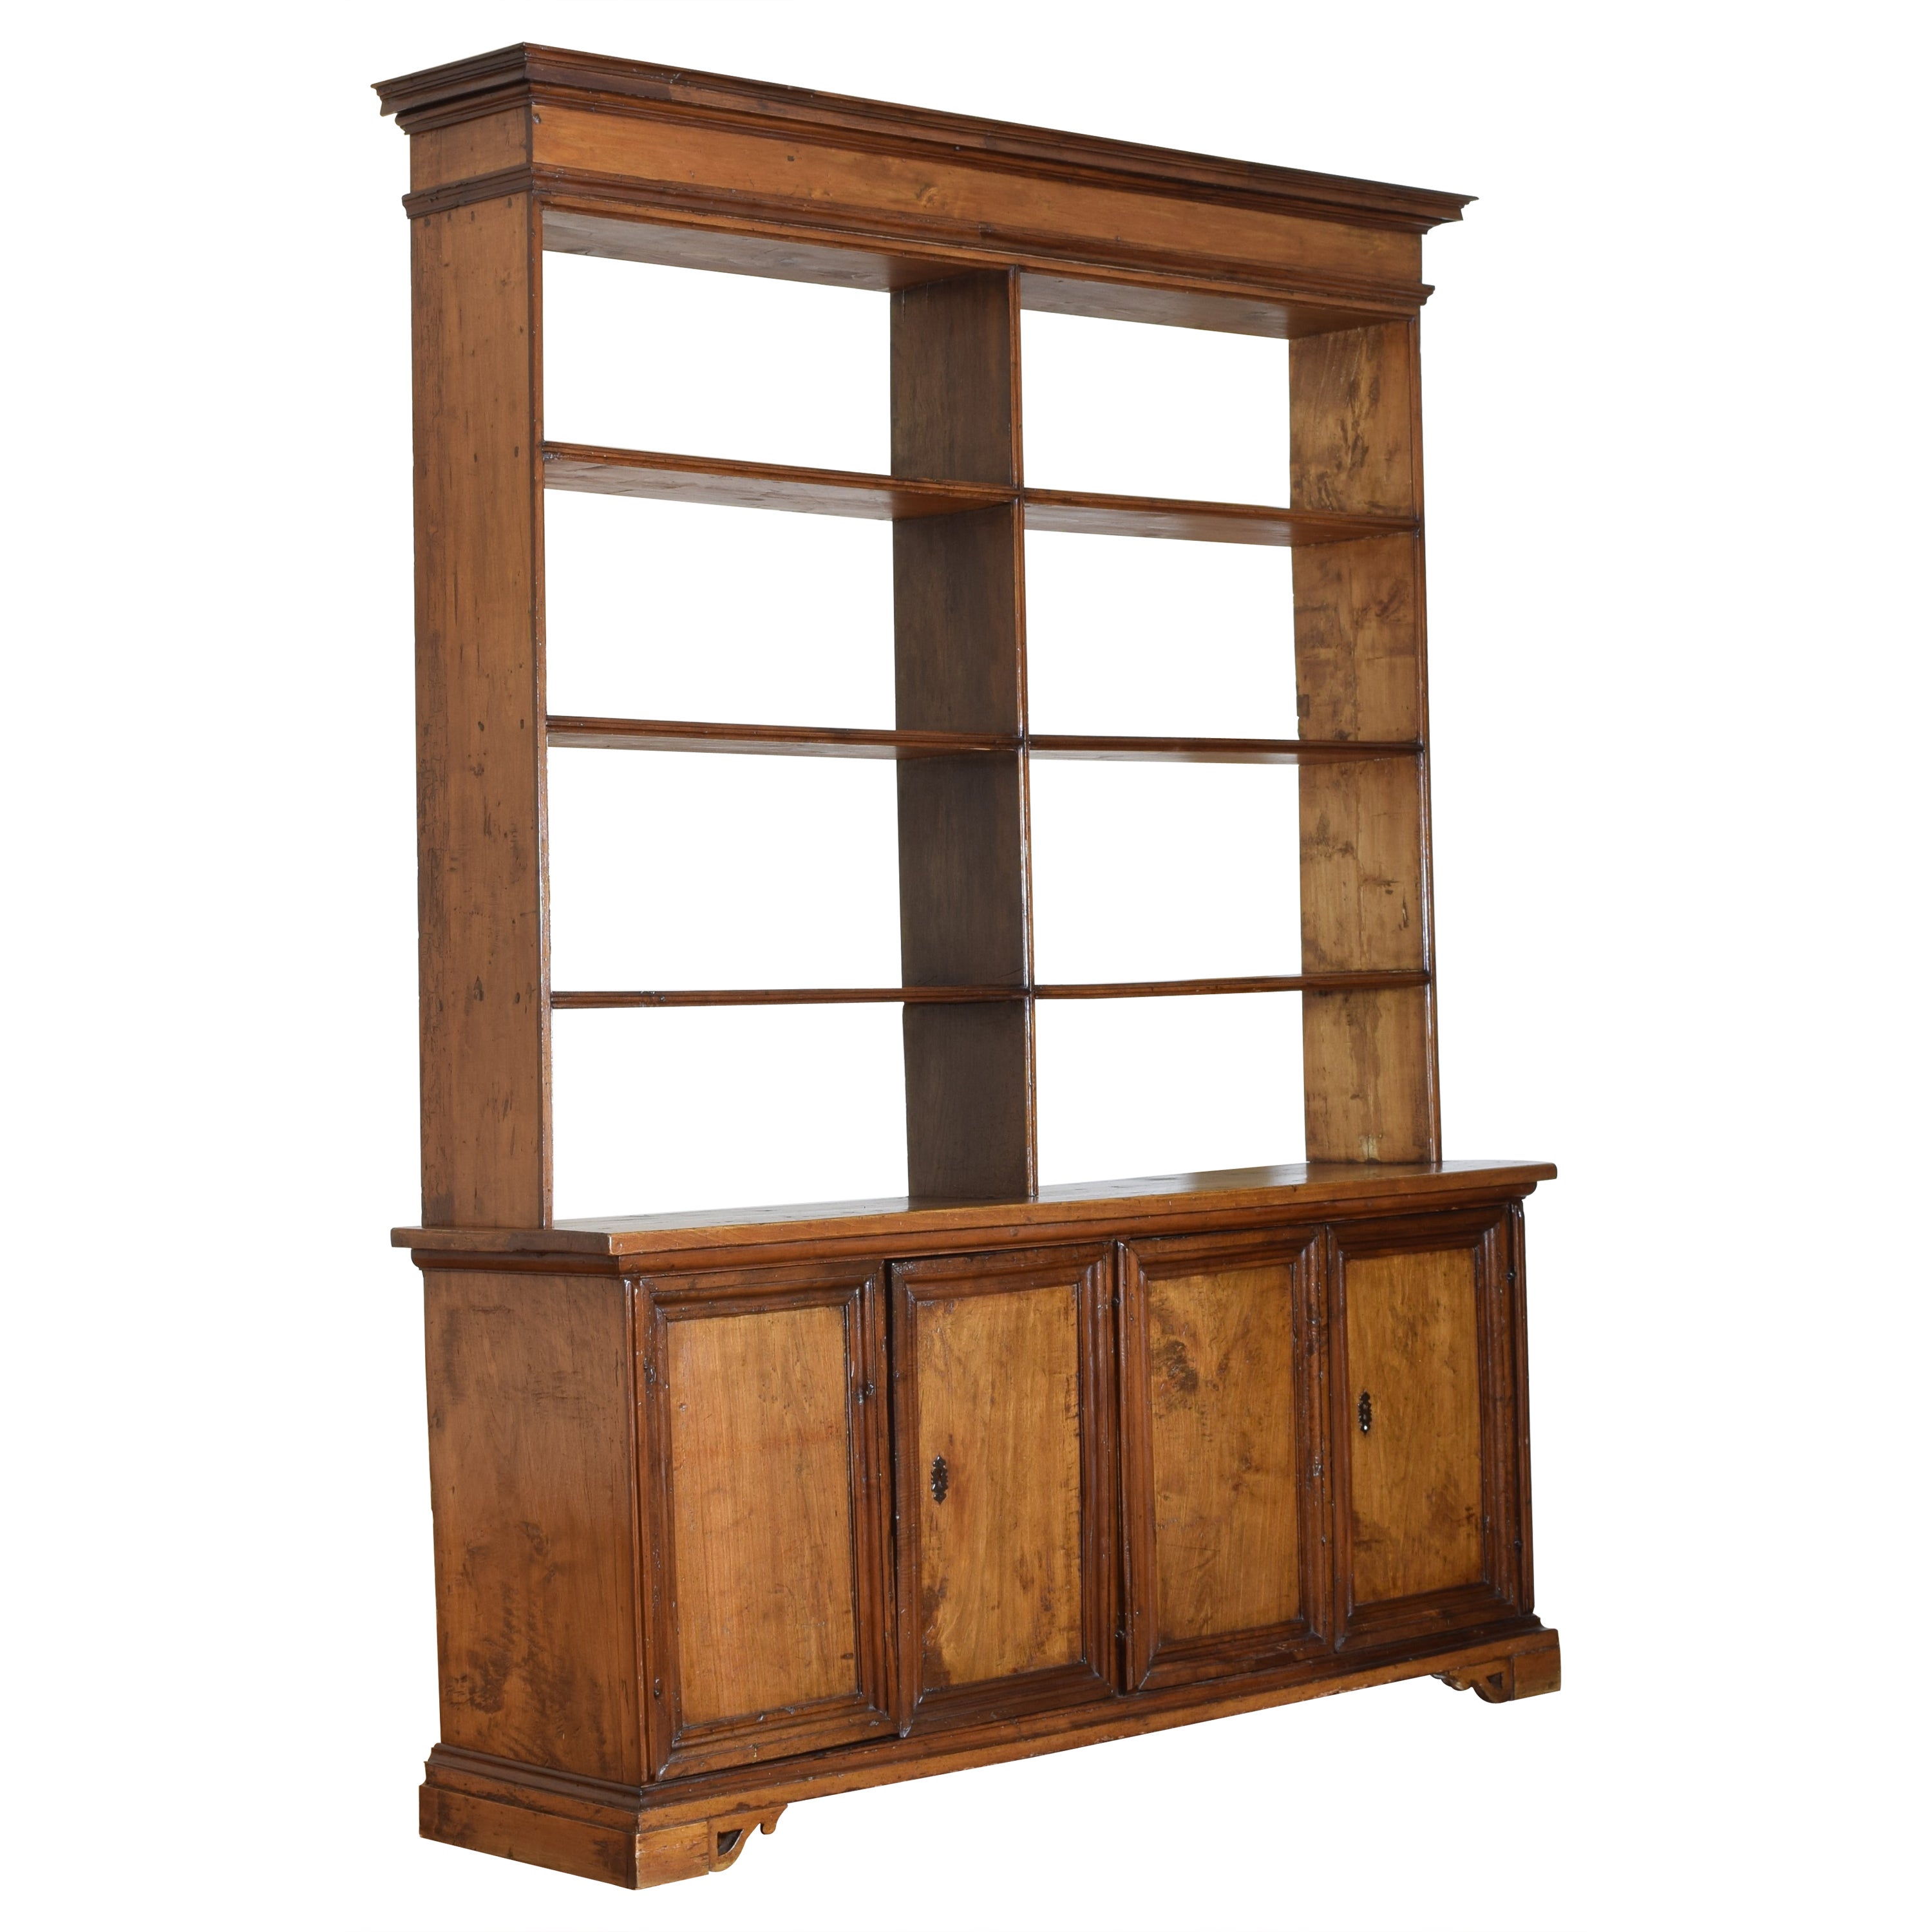 Italian Baroque Style Pinewood Bookcase Cabinet, Early 18th Century and Later For Sale